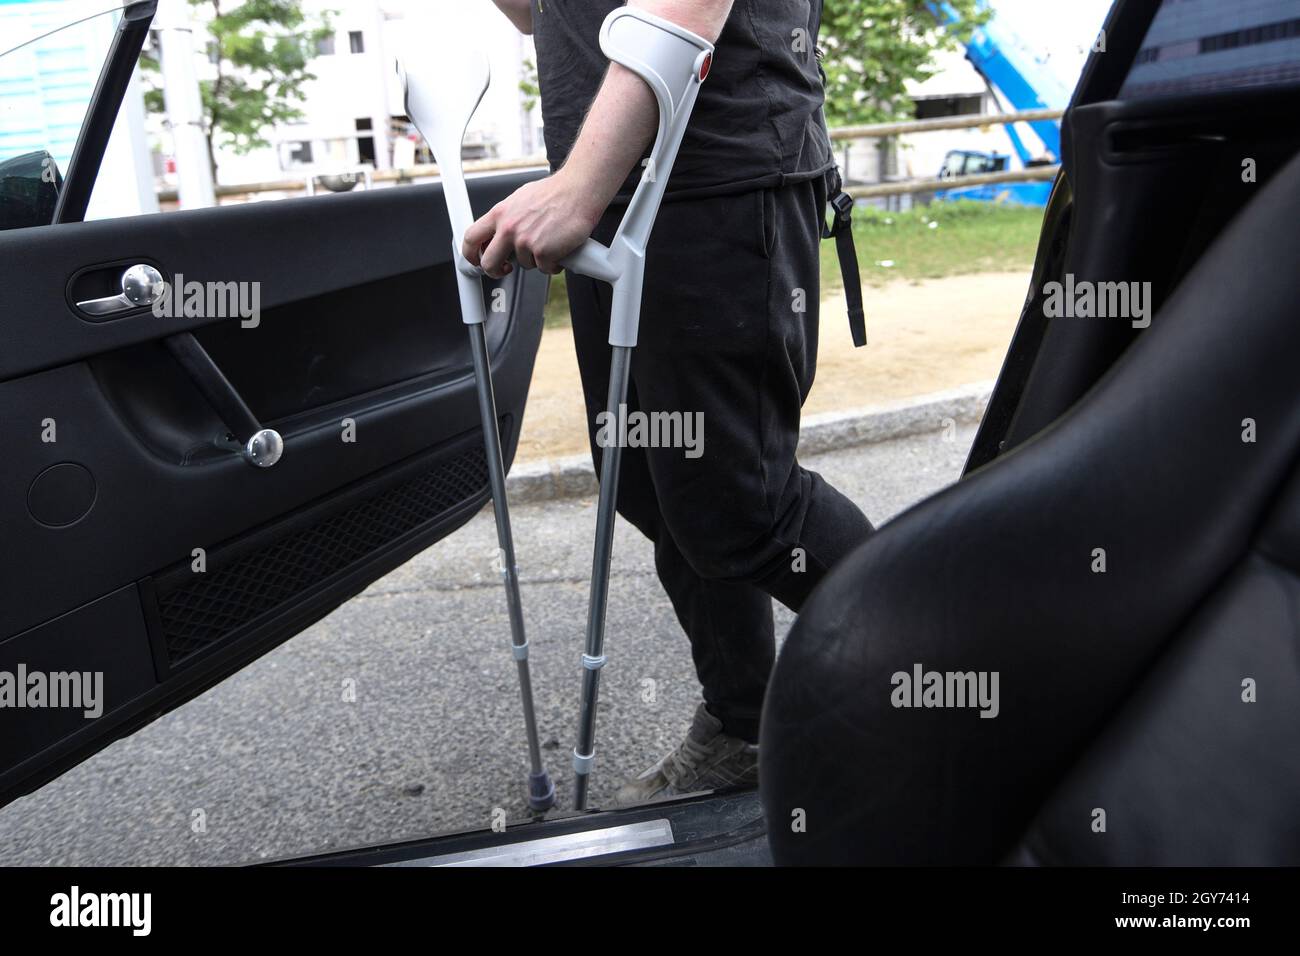 a vehicle for the transport and mobility of disabled people Stock Photo